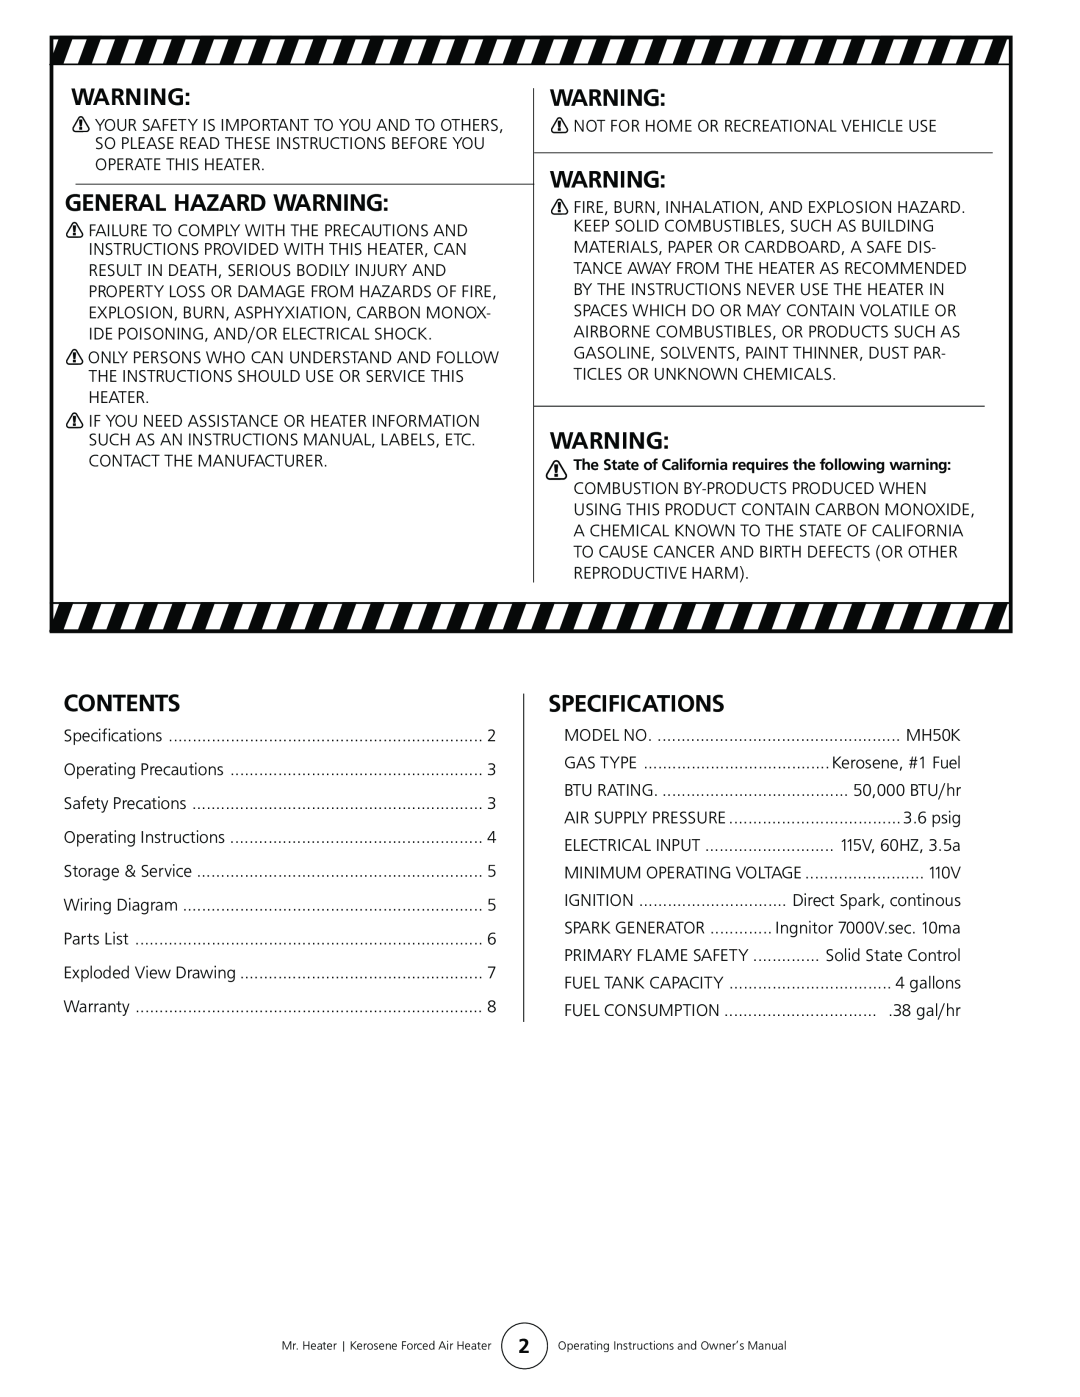 Enerco MH50K operating instructions General Hazard Warning, Contents, Specifications 